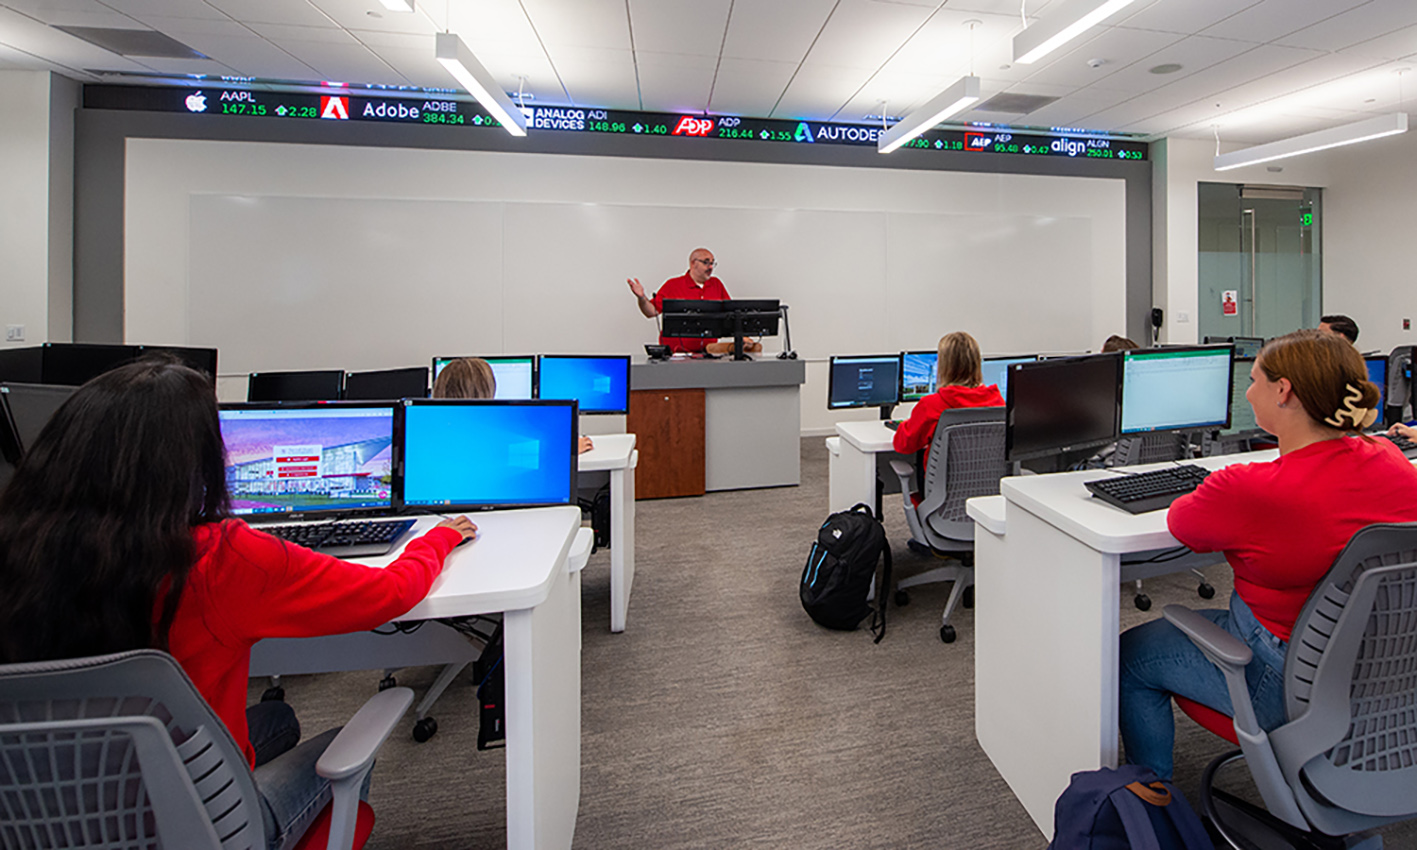 <p>45,000-SF of academic space and offices, including the finance lab with live stock market updates, supports programs in cybersecurity, business analytics, game design and development, and more.</p>
